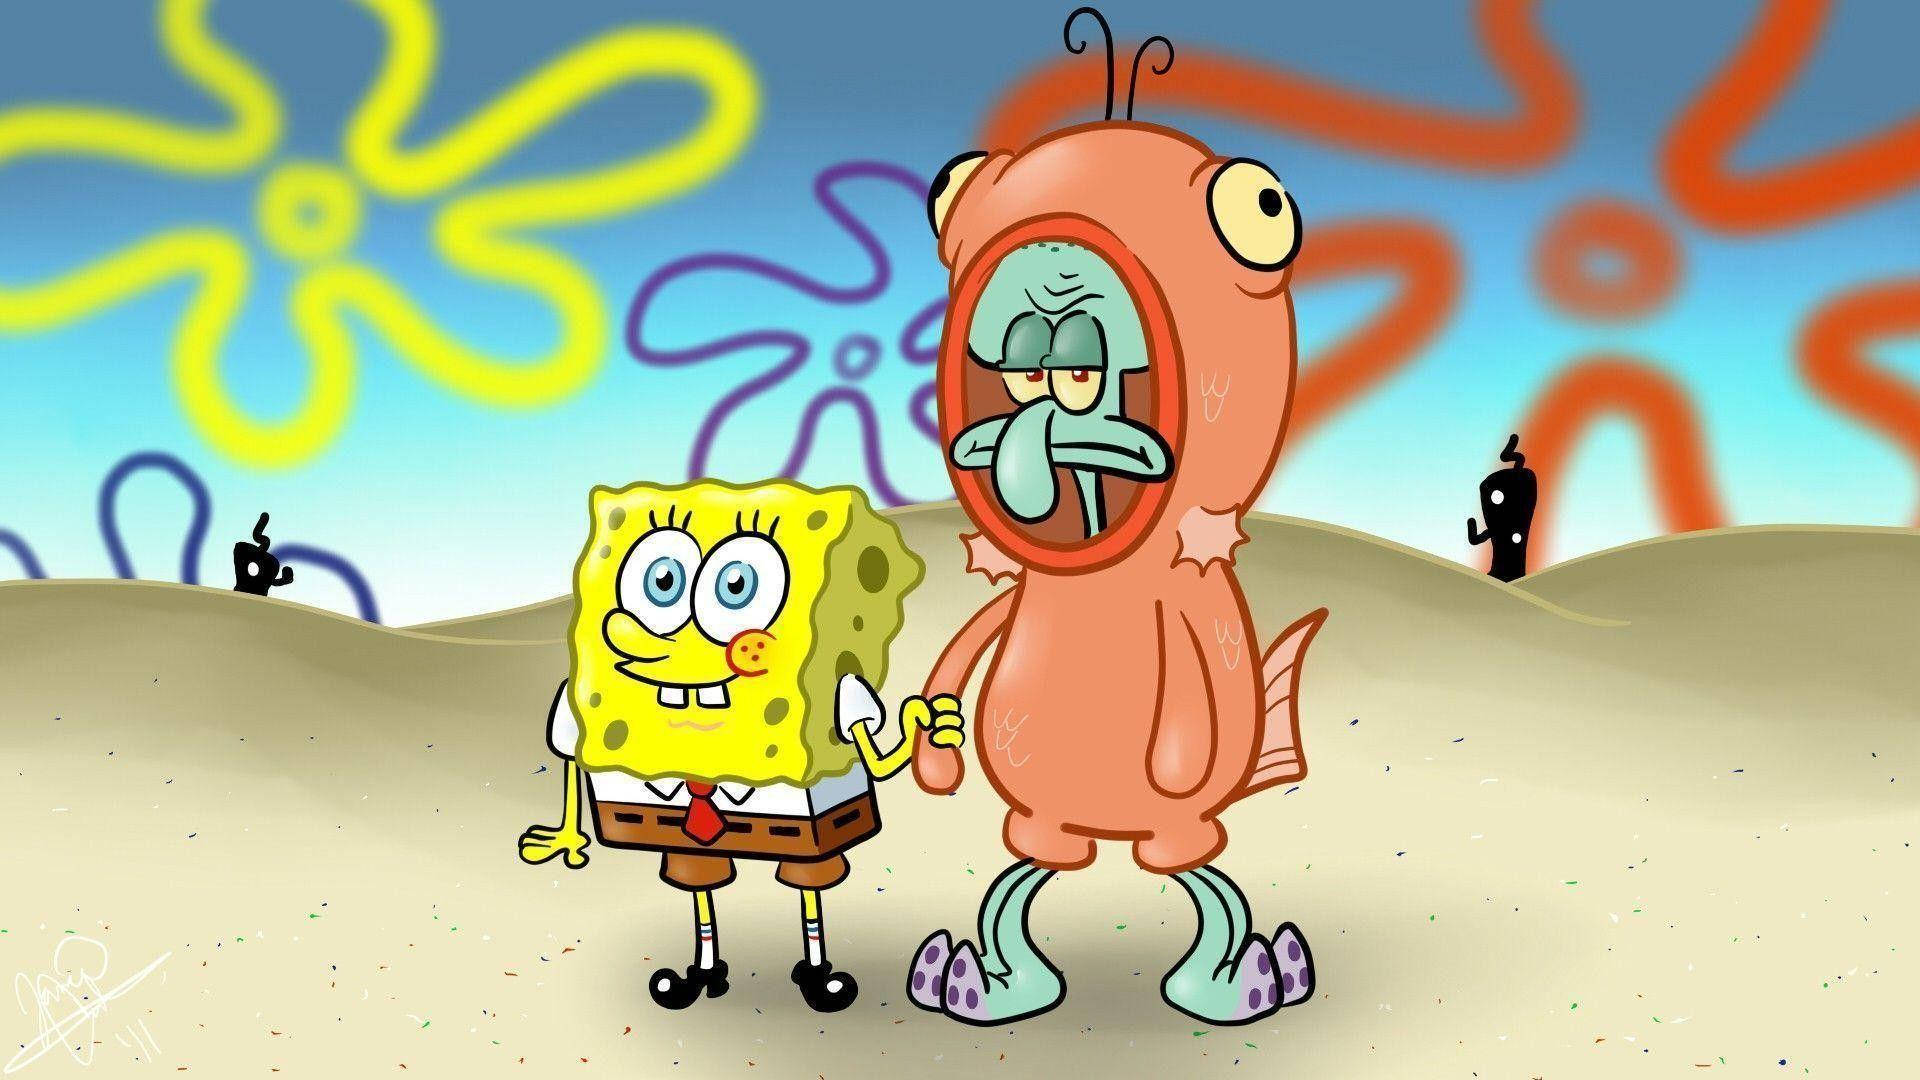 Cute Spongebob And Annoyed Squidward Holding Hands